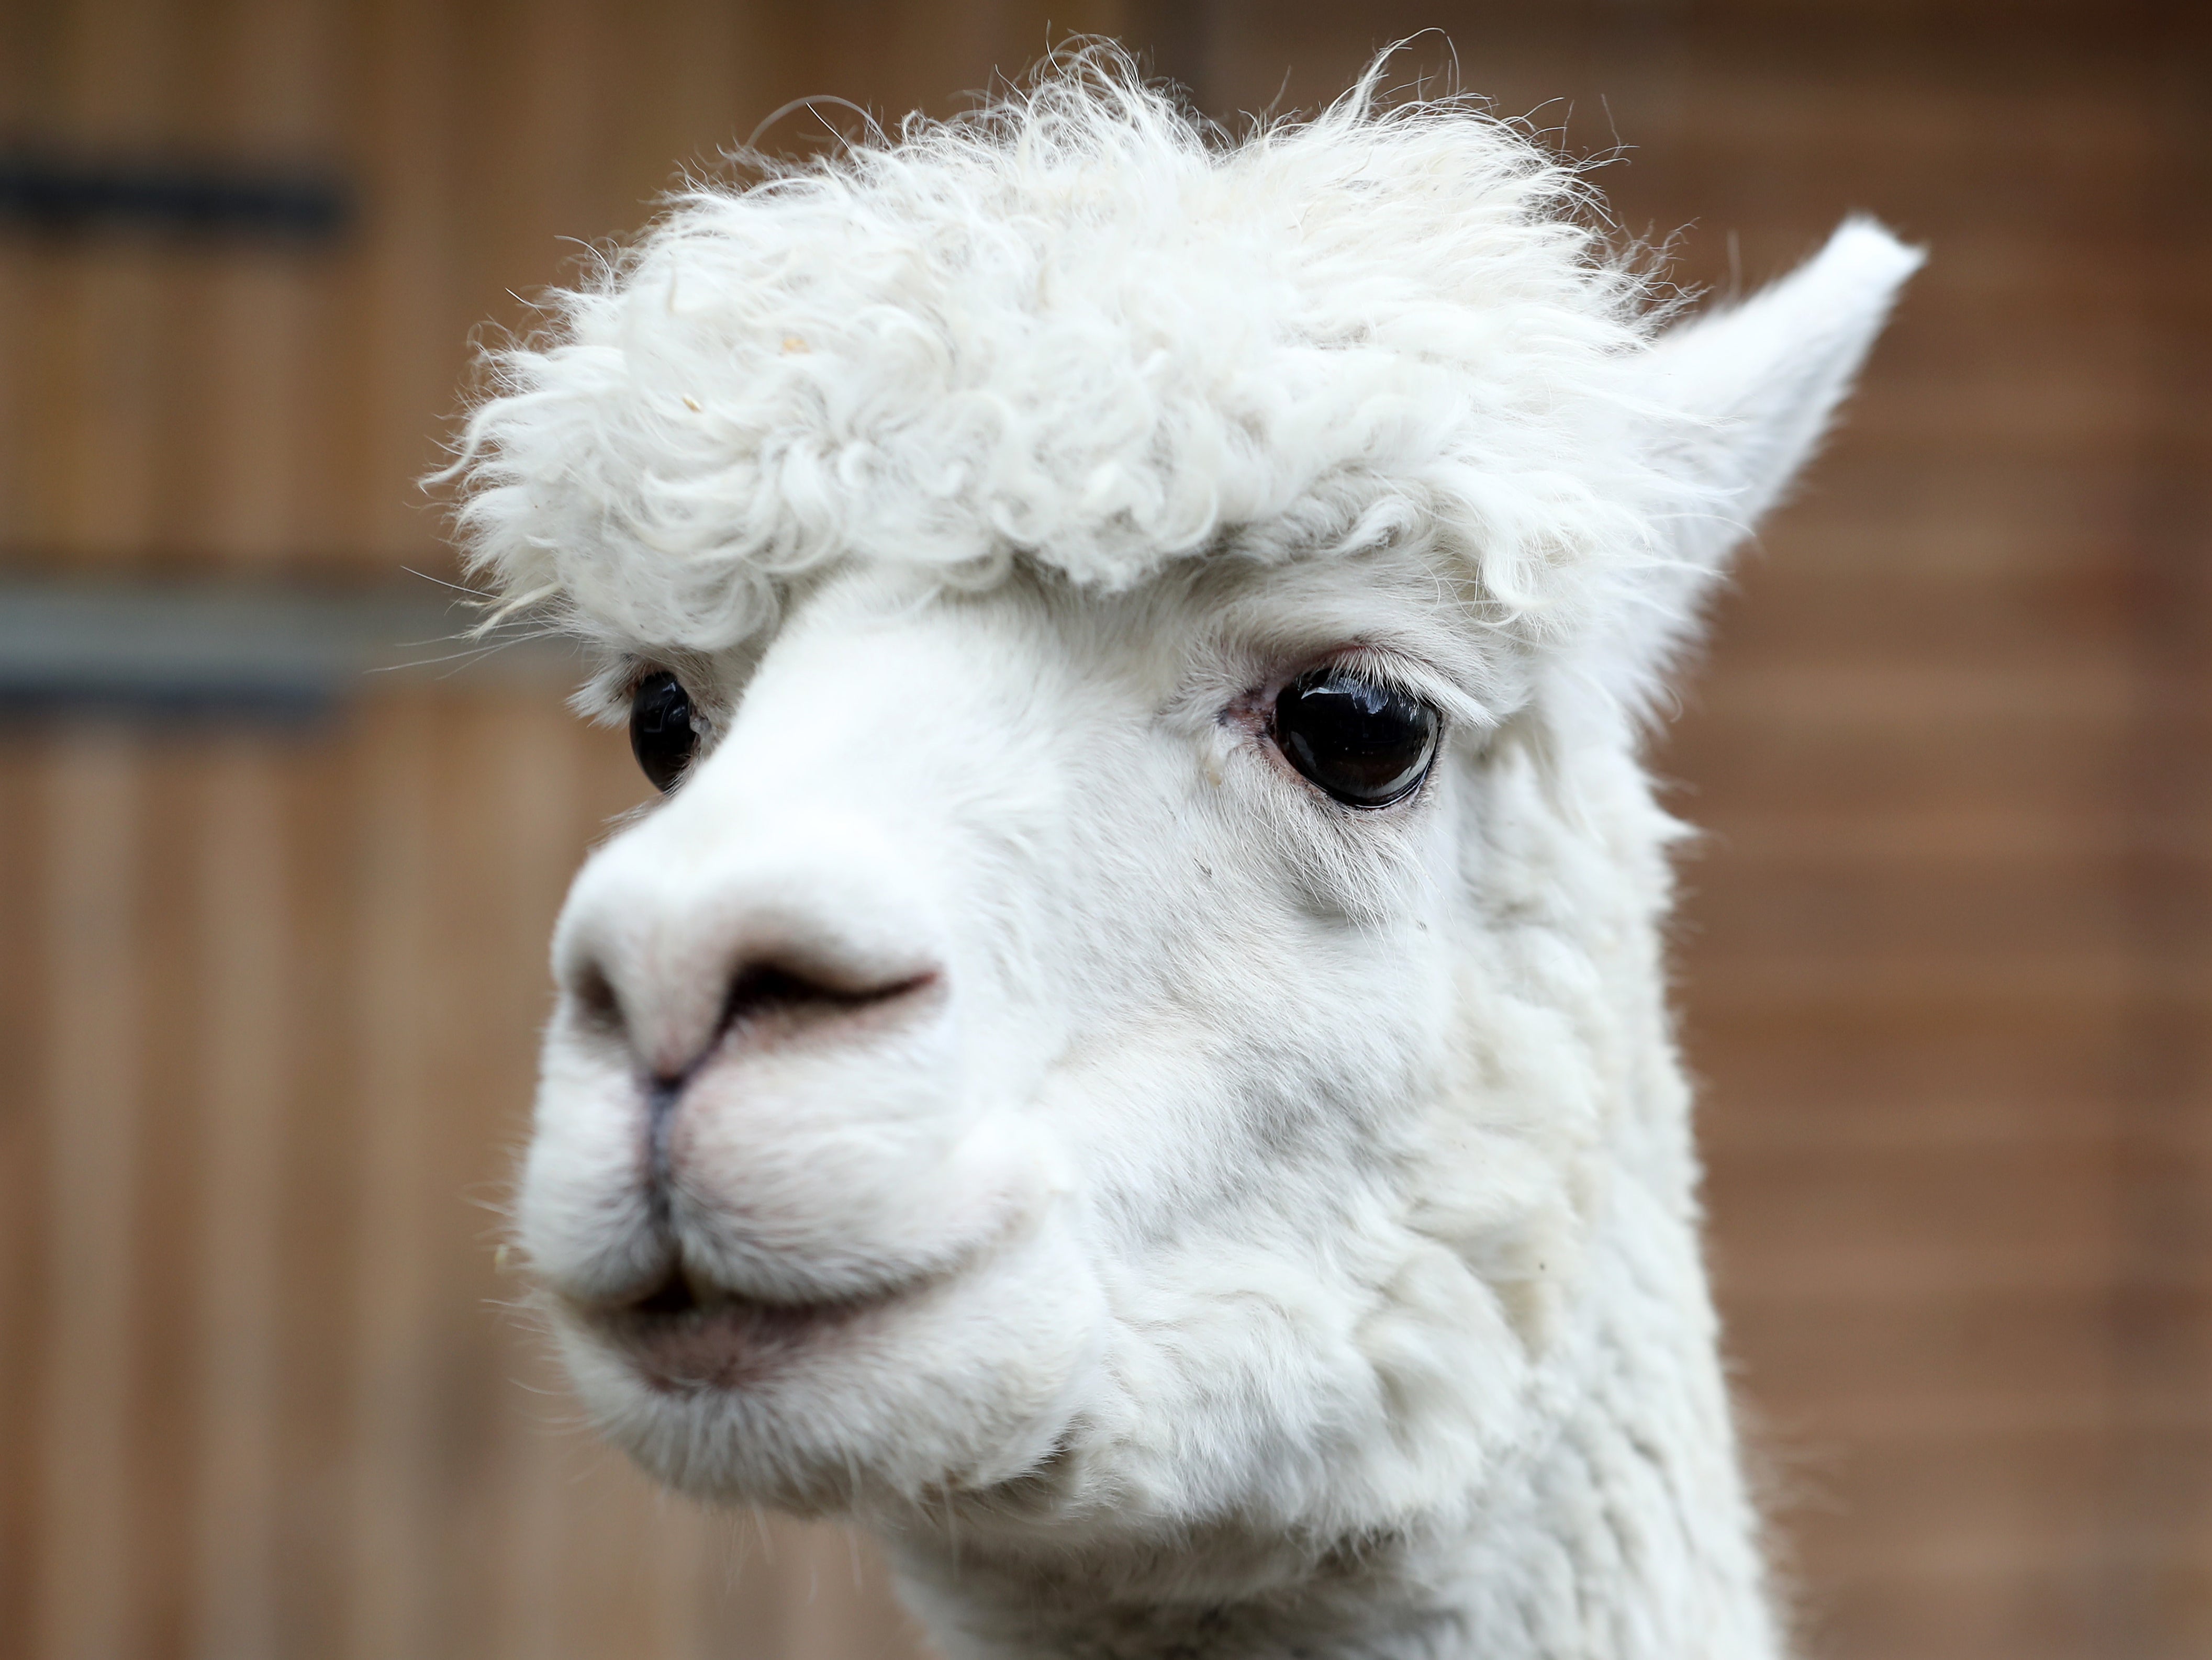 Llama Antibodies 'Among Most Effective' Covid Neutralising Agents, Phe Says  | The Independent